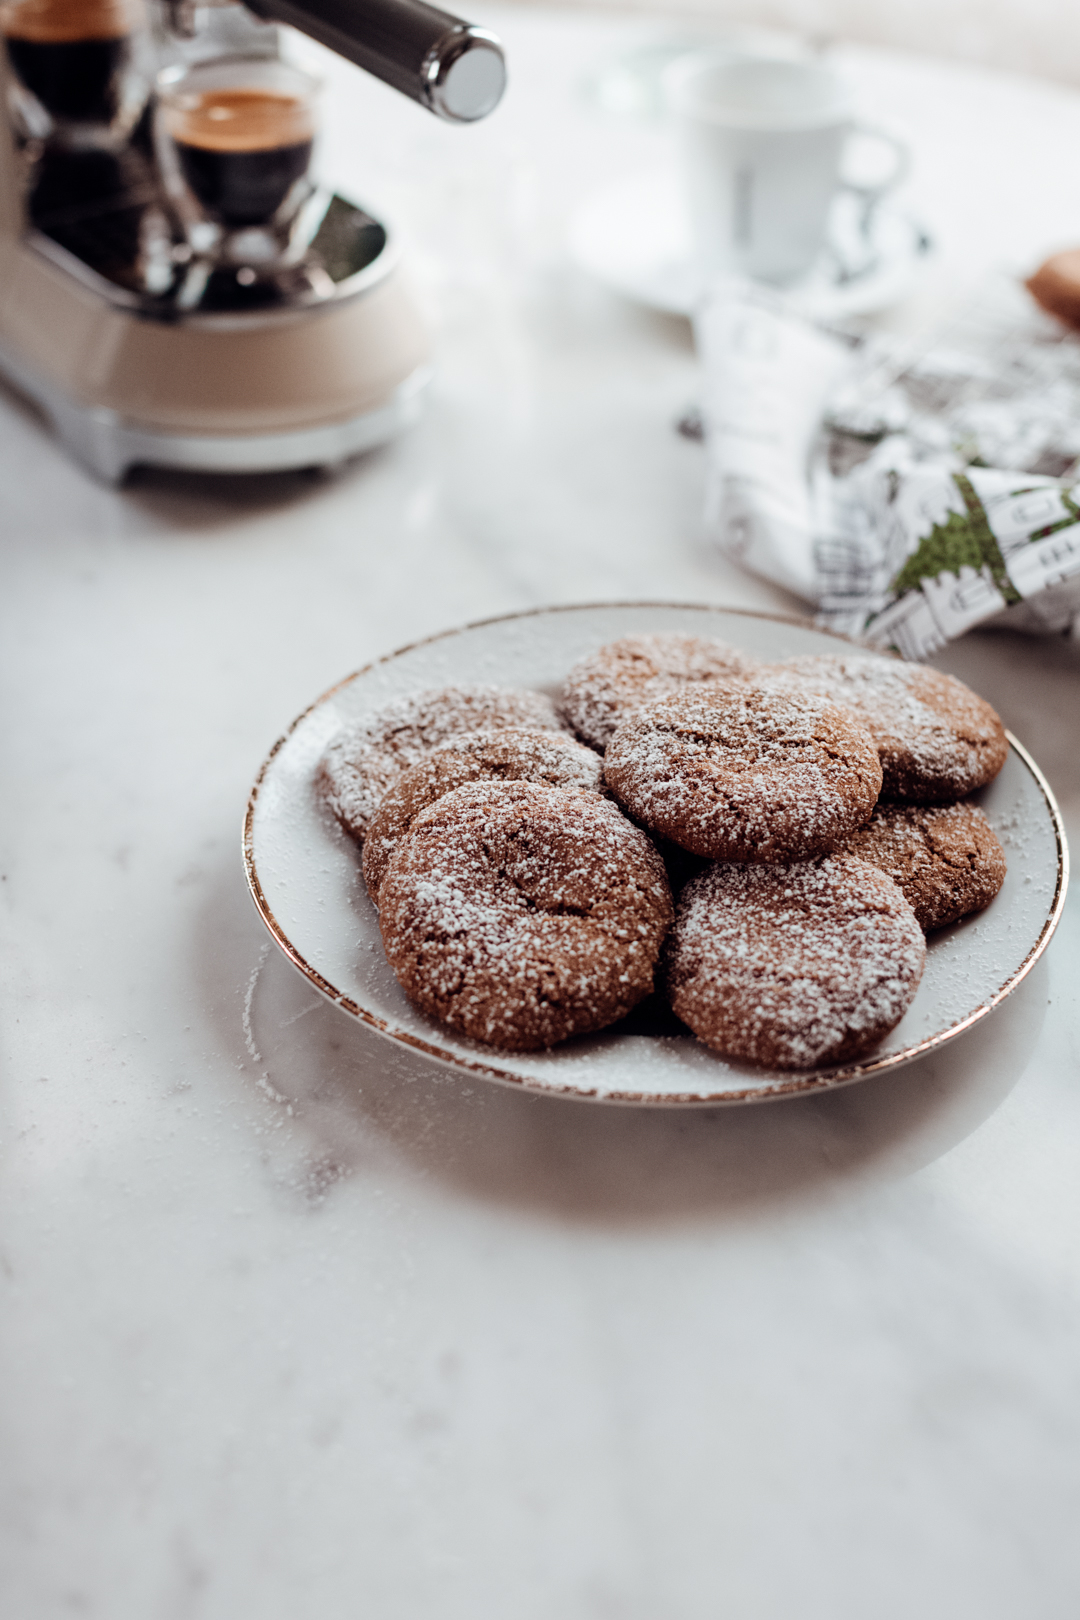 https://christiannkoepke.com/2018/12/11/holiday-baking-party-espresso-molasses-holiday-crinkles-gluten-free-with-crate-barrel/crate-barrel-creative-direction-photography-by-christiann-koepke_-6/